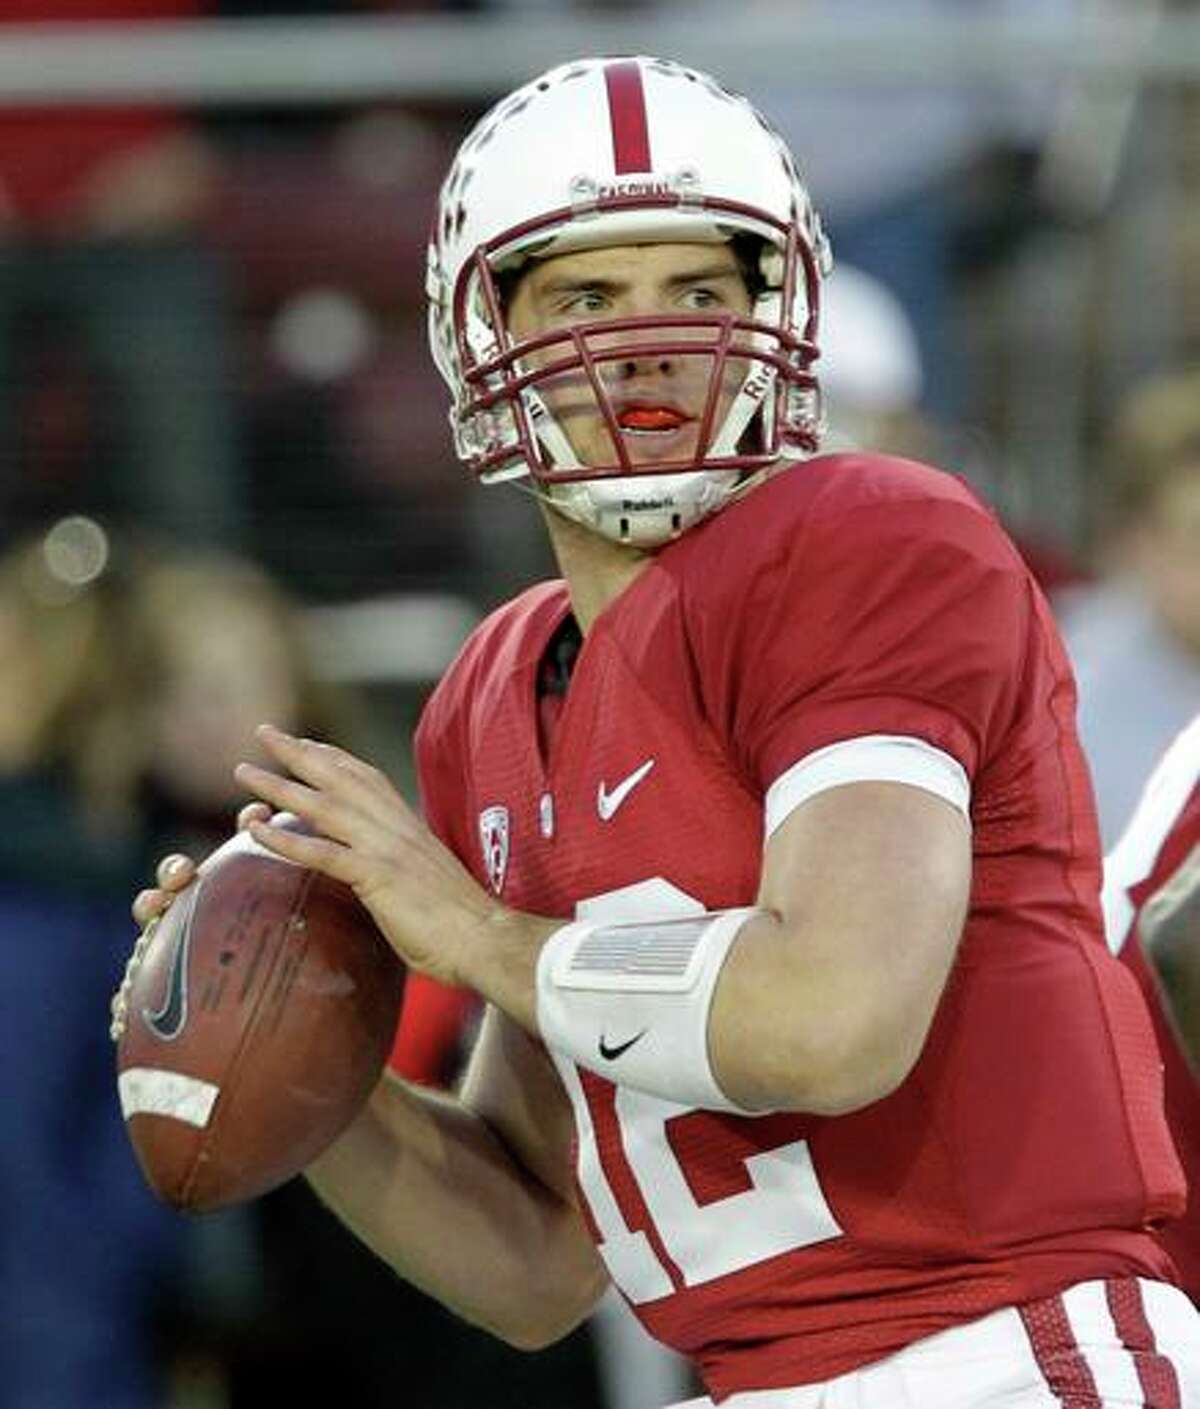 Andrew Luck threw for 9,430 yards and 82 touchdowns as Stanford’s quarterback.